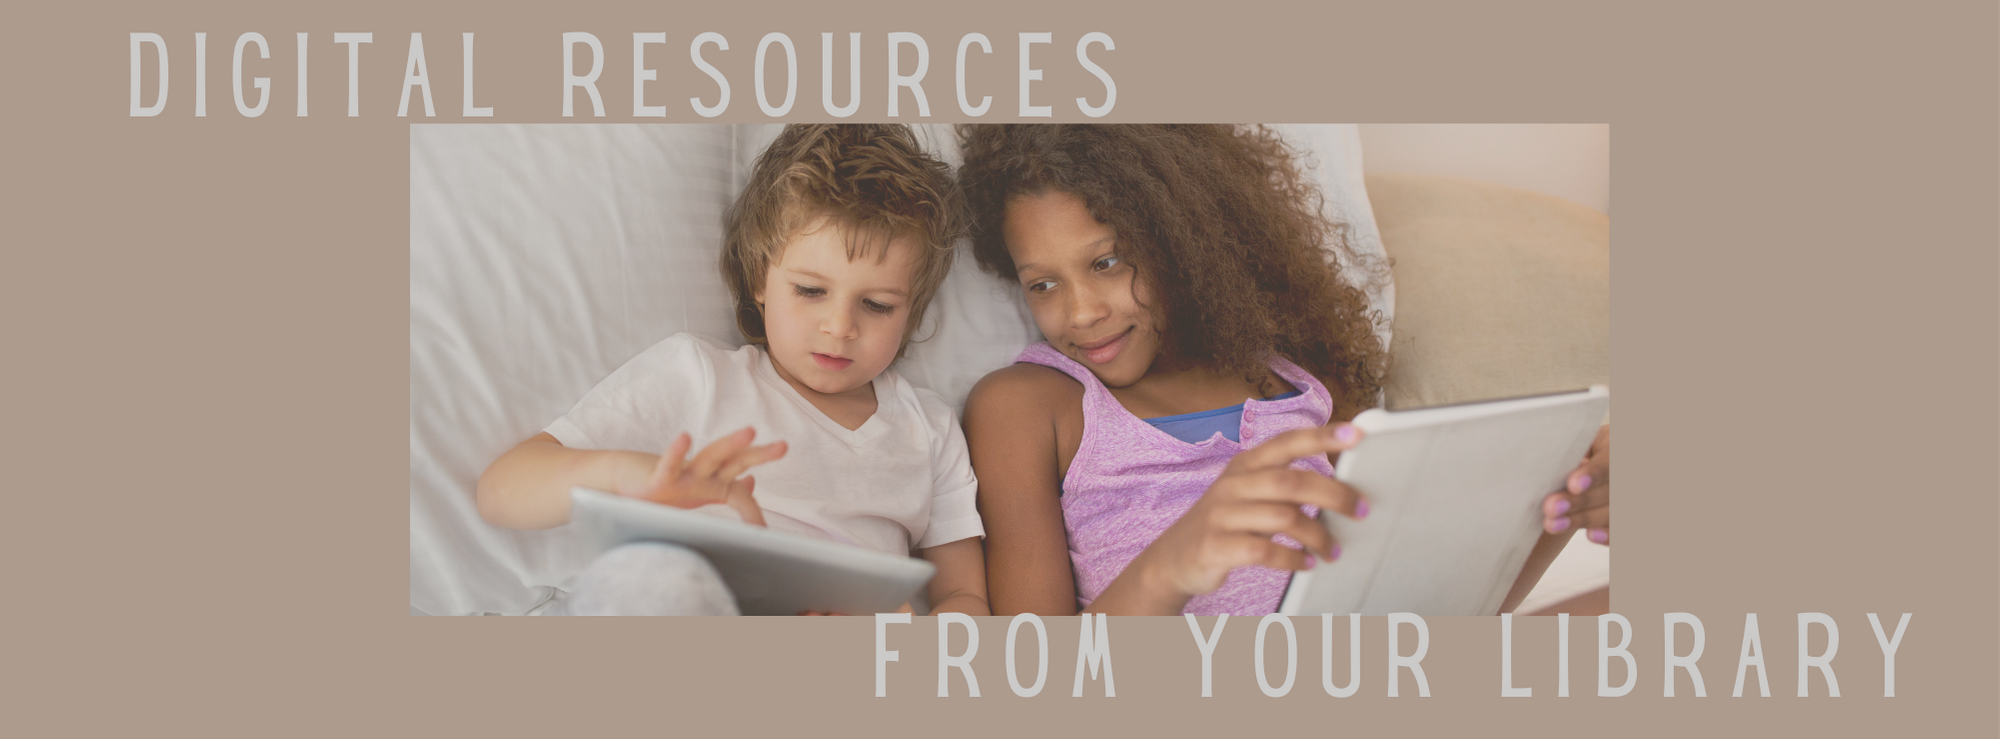 Digital Resources From Your Library list